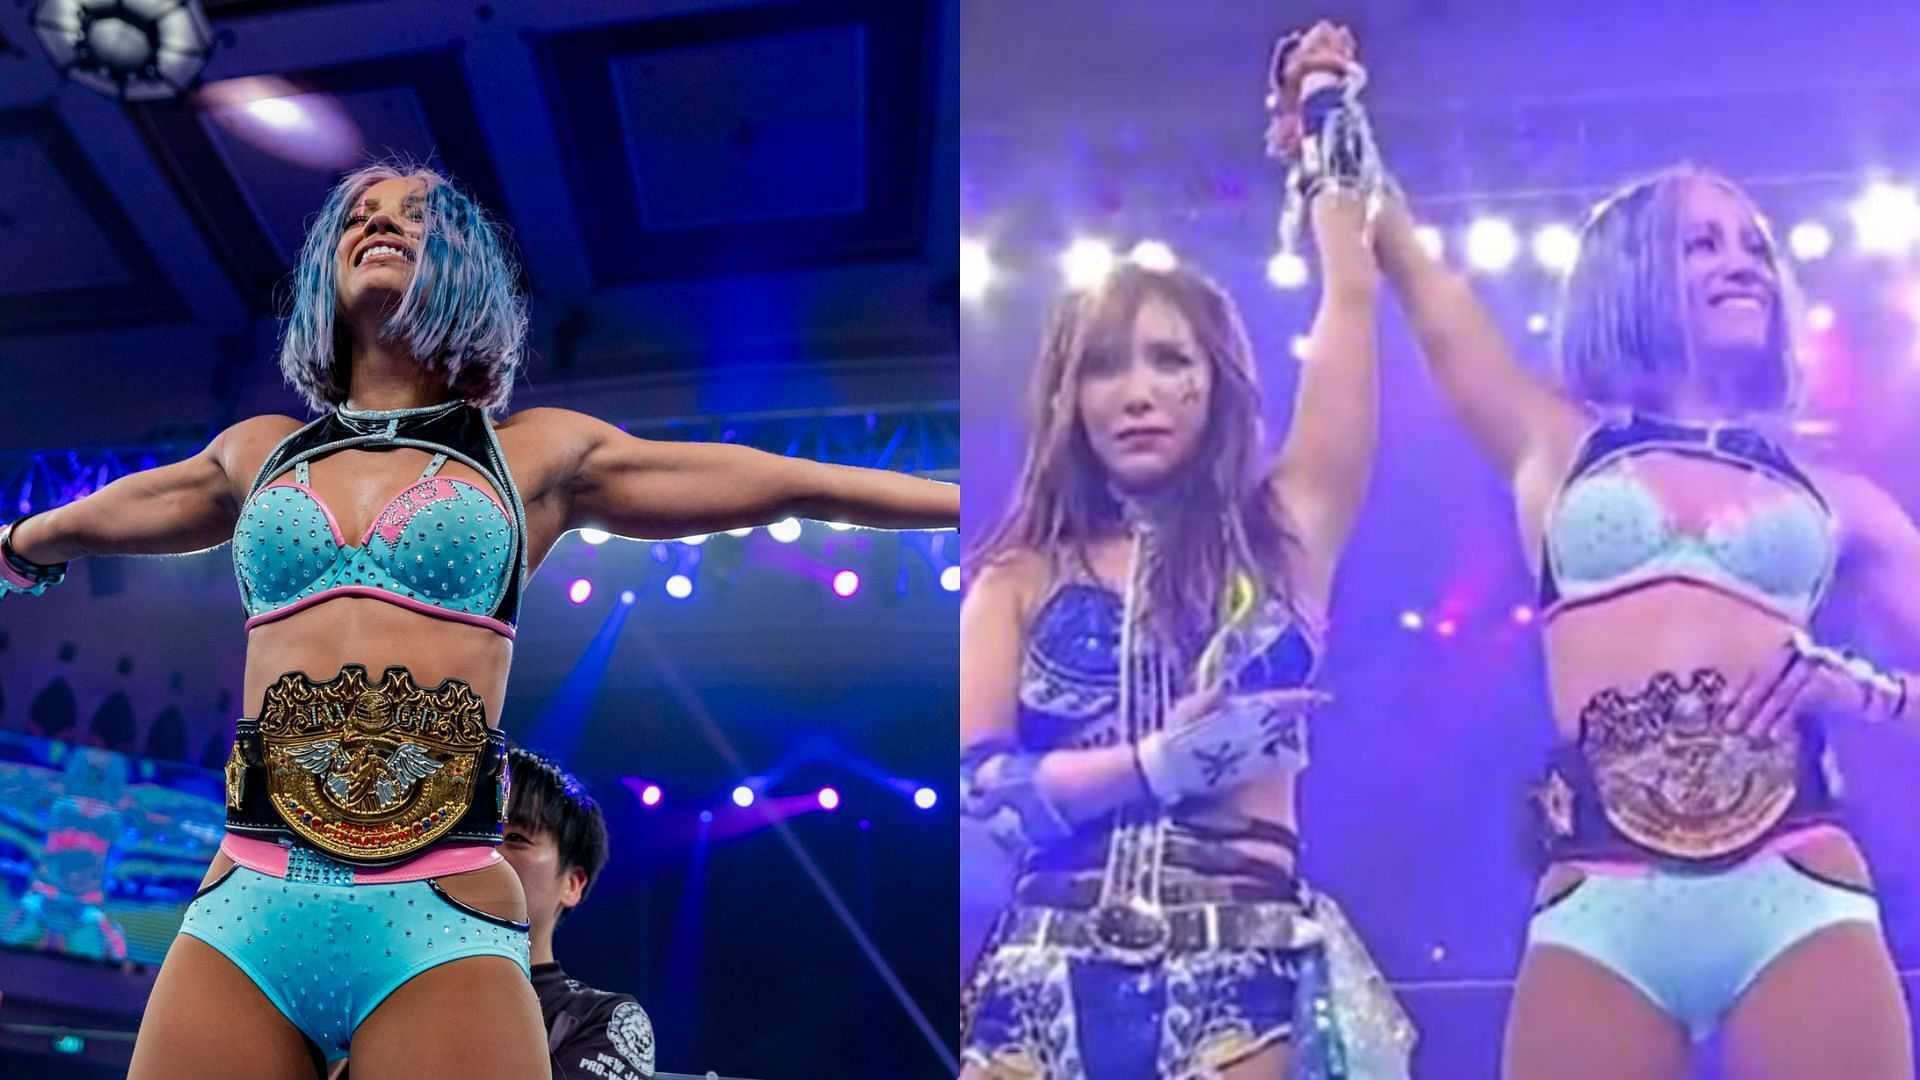 Mercedes Mone made her NJPW x STARDOM debut at Battle in the Valley